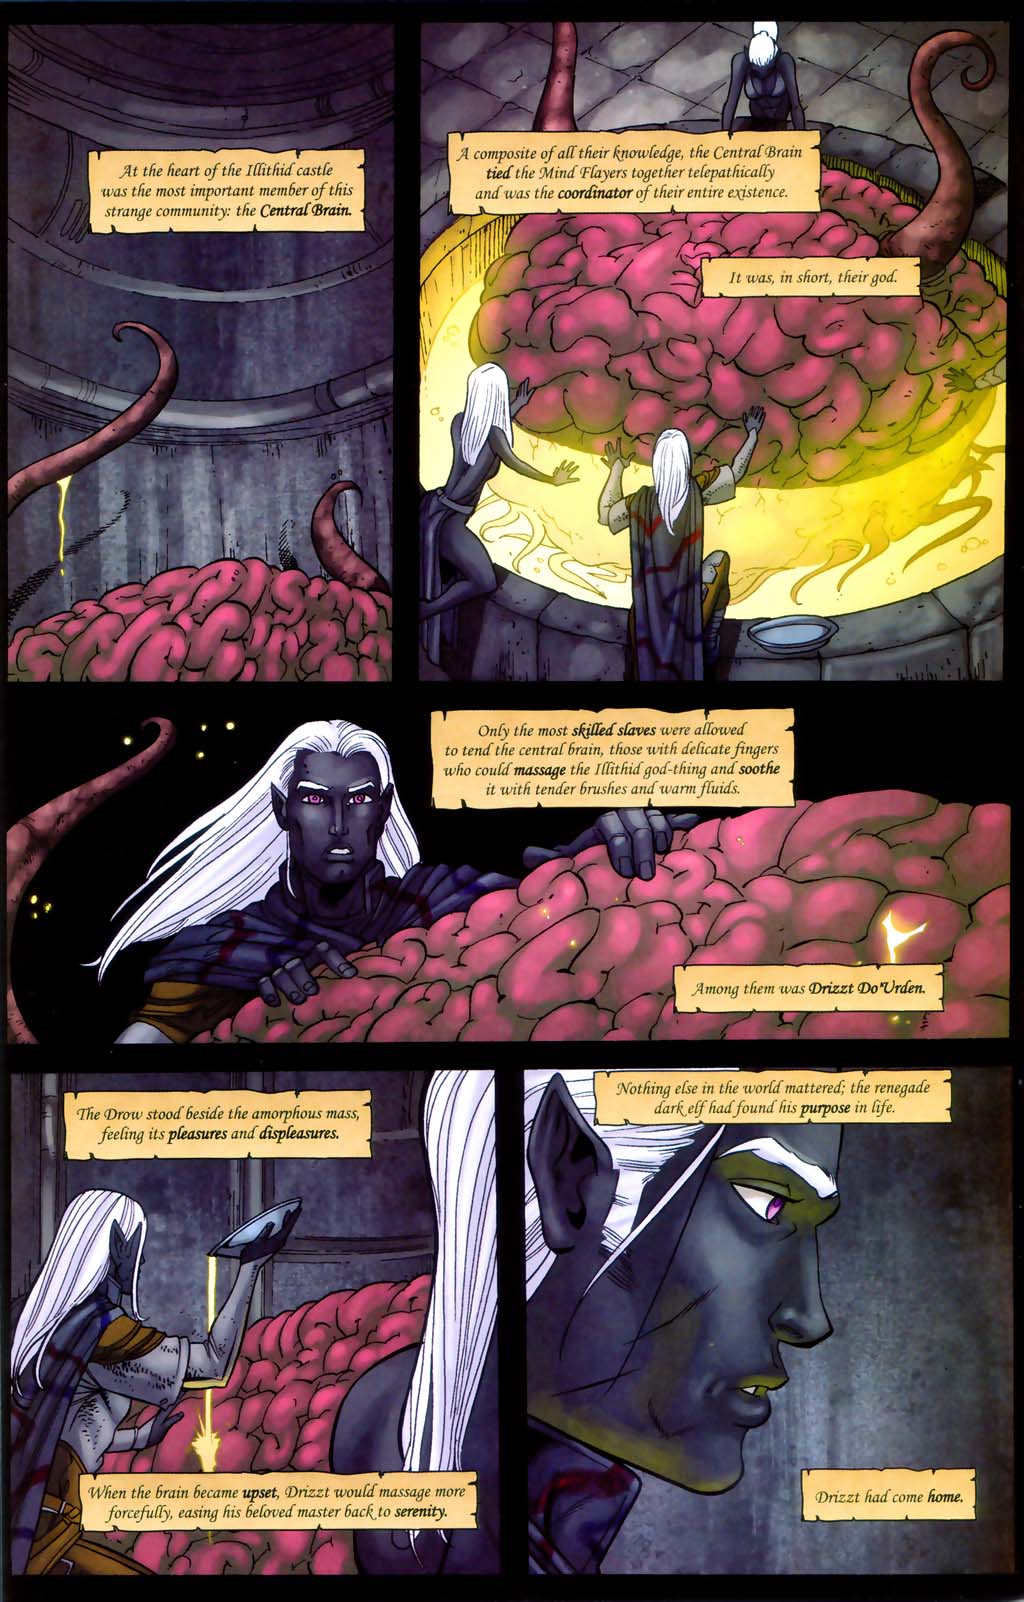 Forgotten Realms: Exile #3 - Issue #3, Part 1